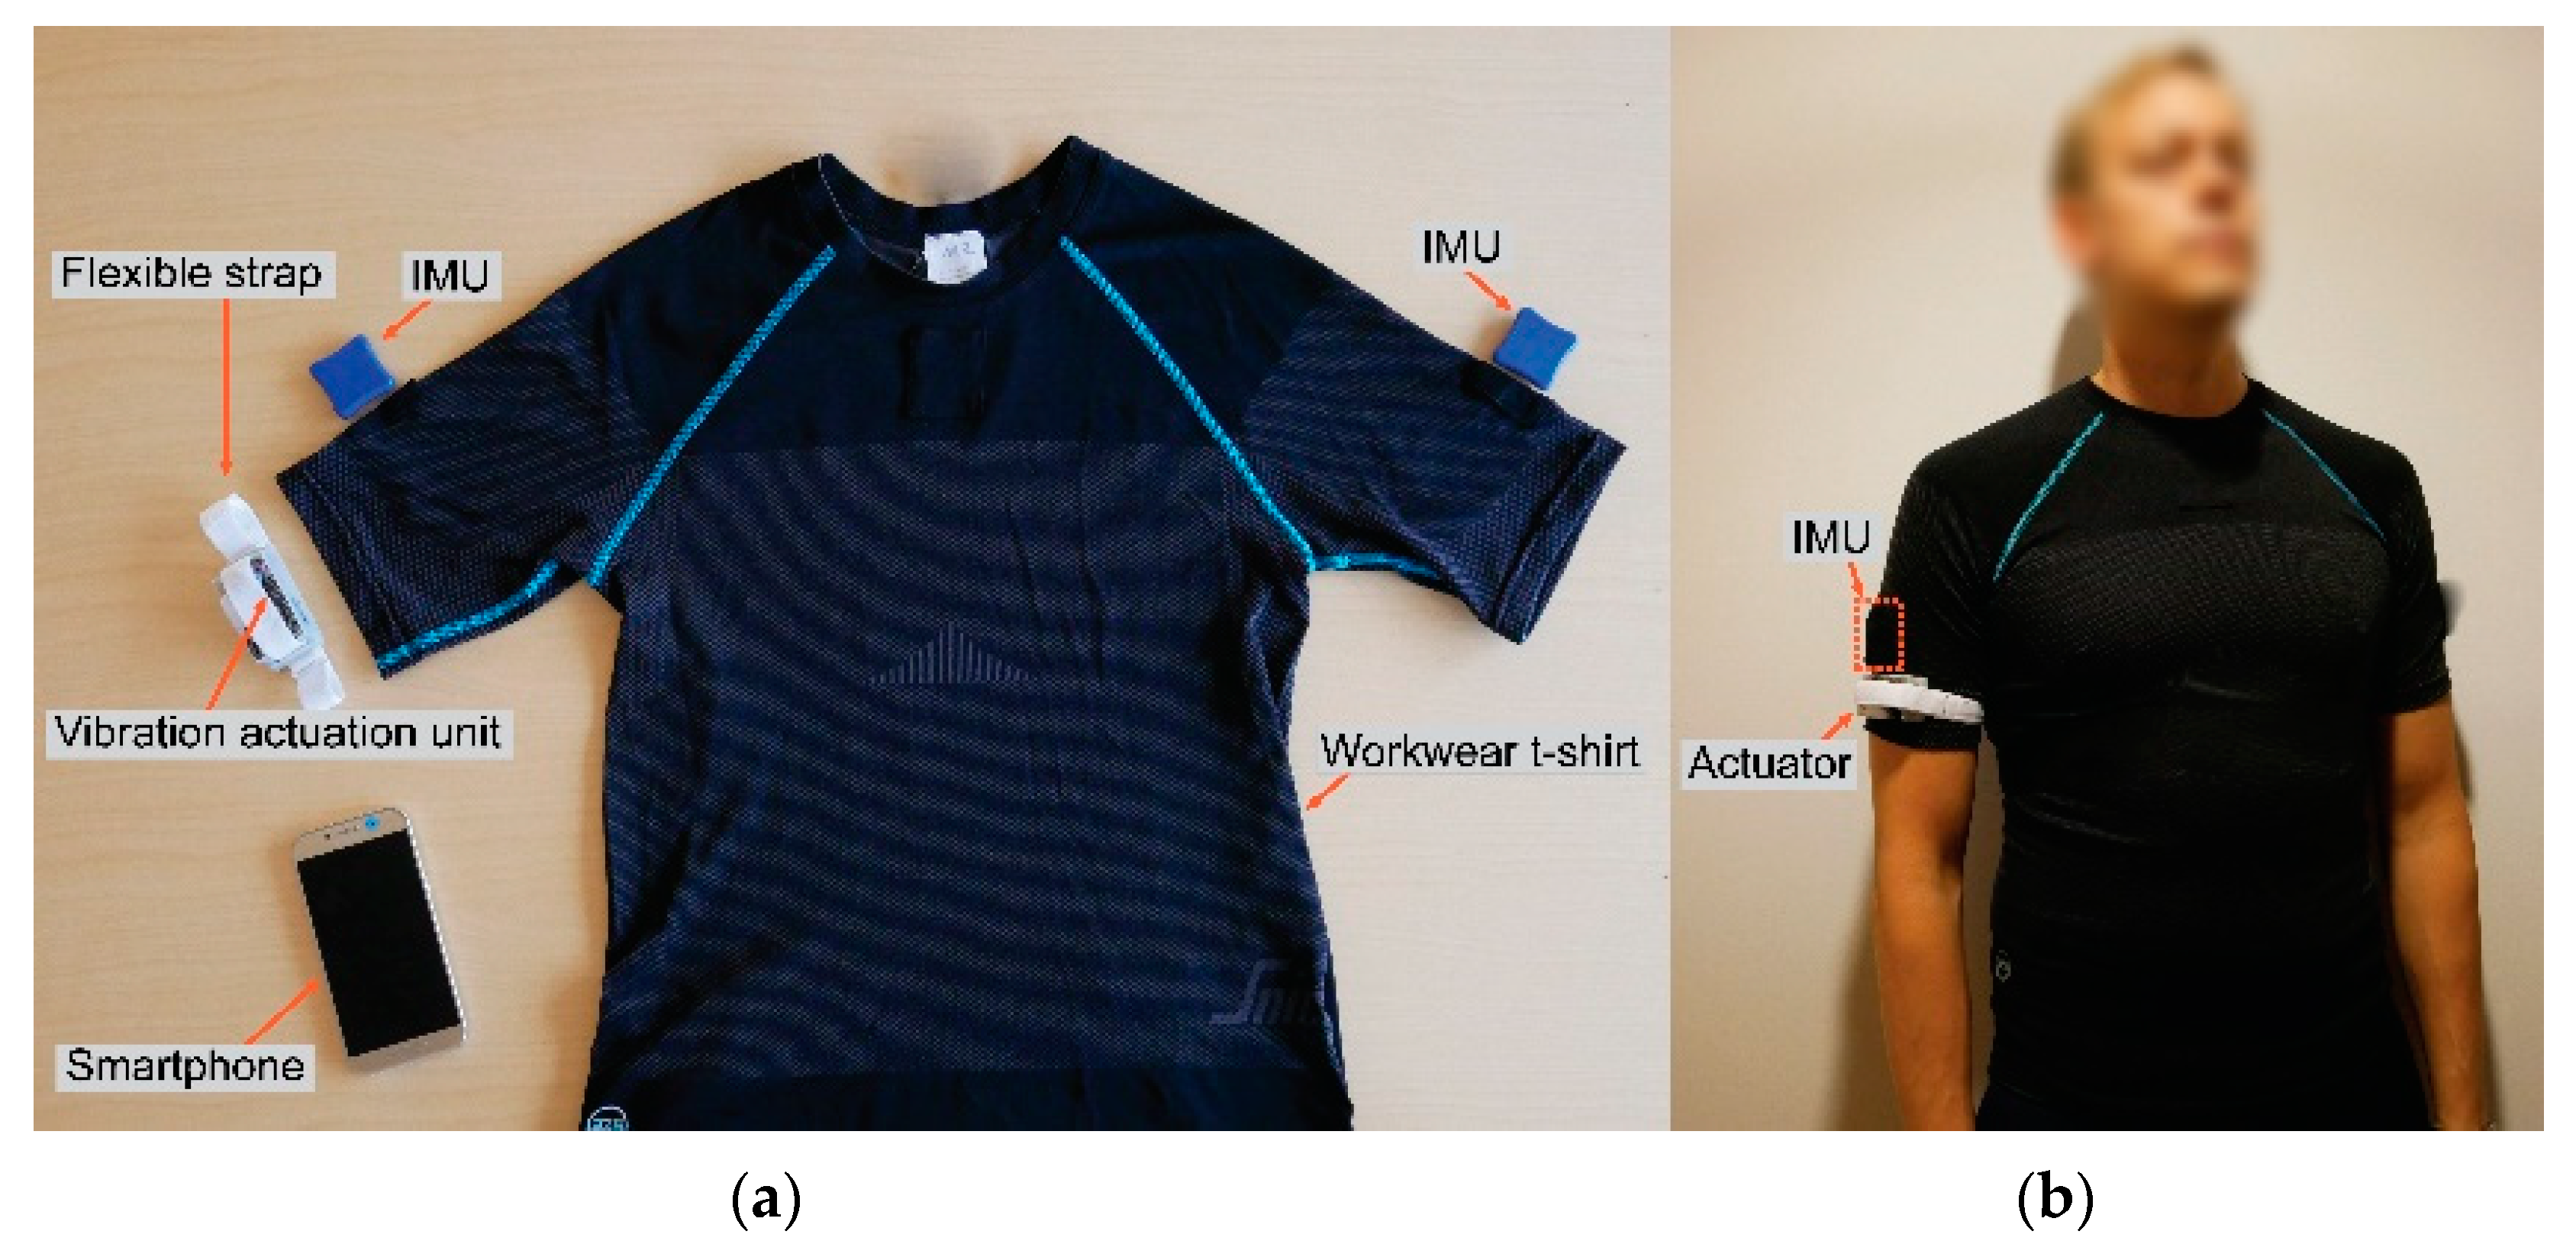 Sensors | Free Full-Text | A Wearable Sensor System for Physical Ergonomics  Interventions Using Haptic Feedback | HTML